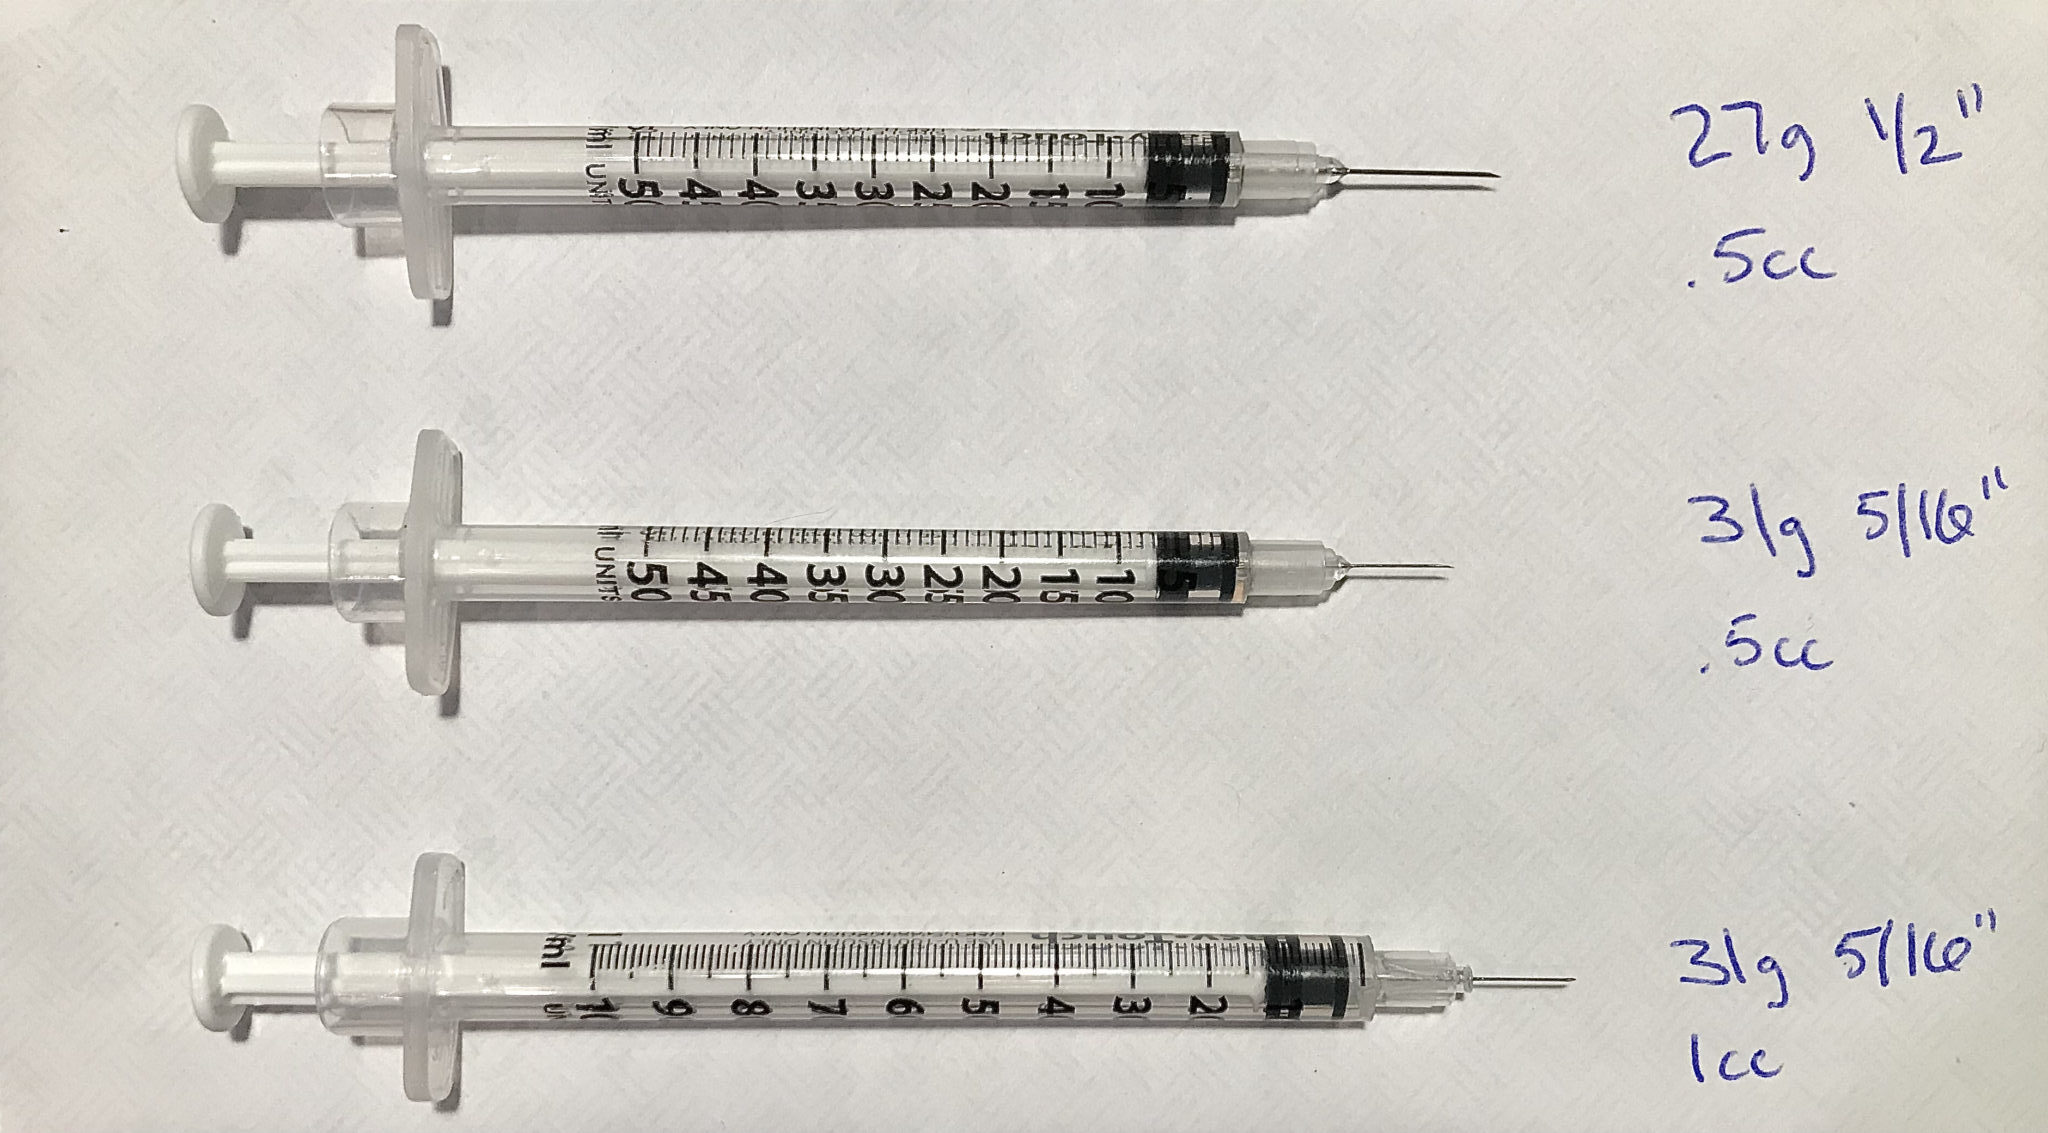 How I Use Short-Tip Needles: A Harm Reduction Guide